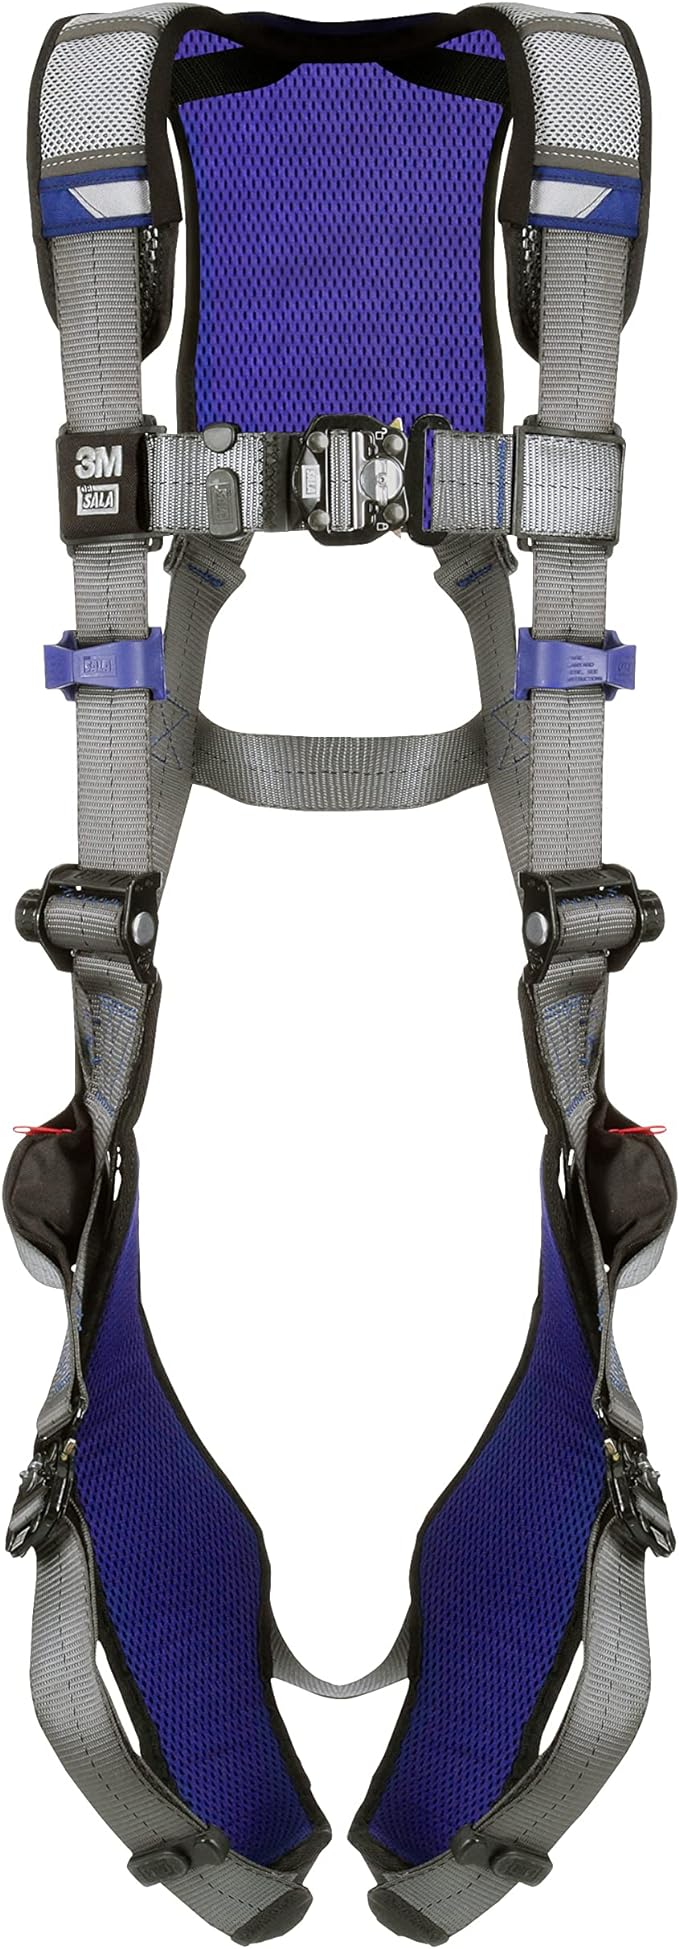 X200 COMFORT VEST SAFETY HARNESS - Tagged Gloves